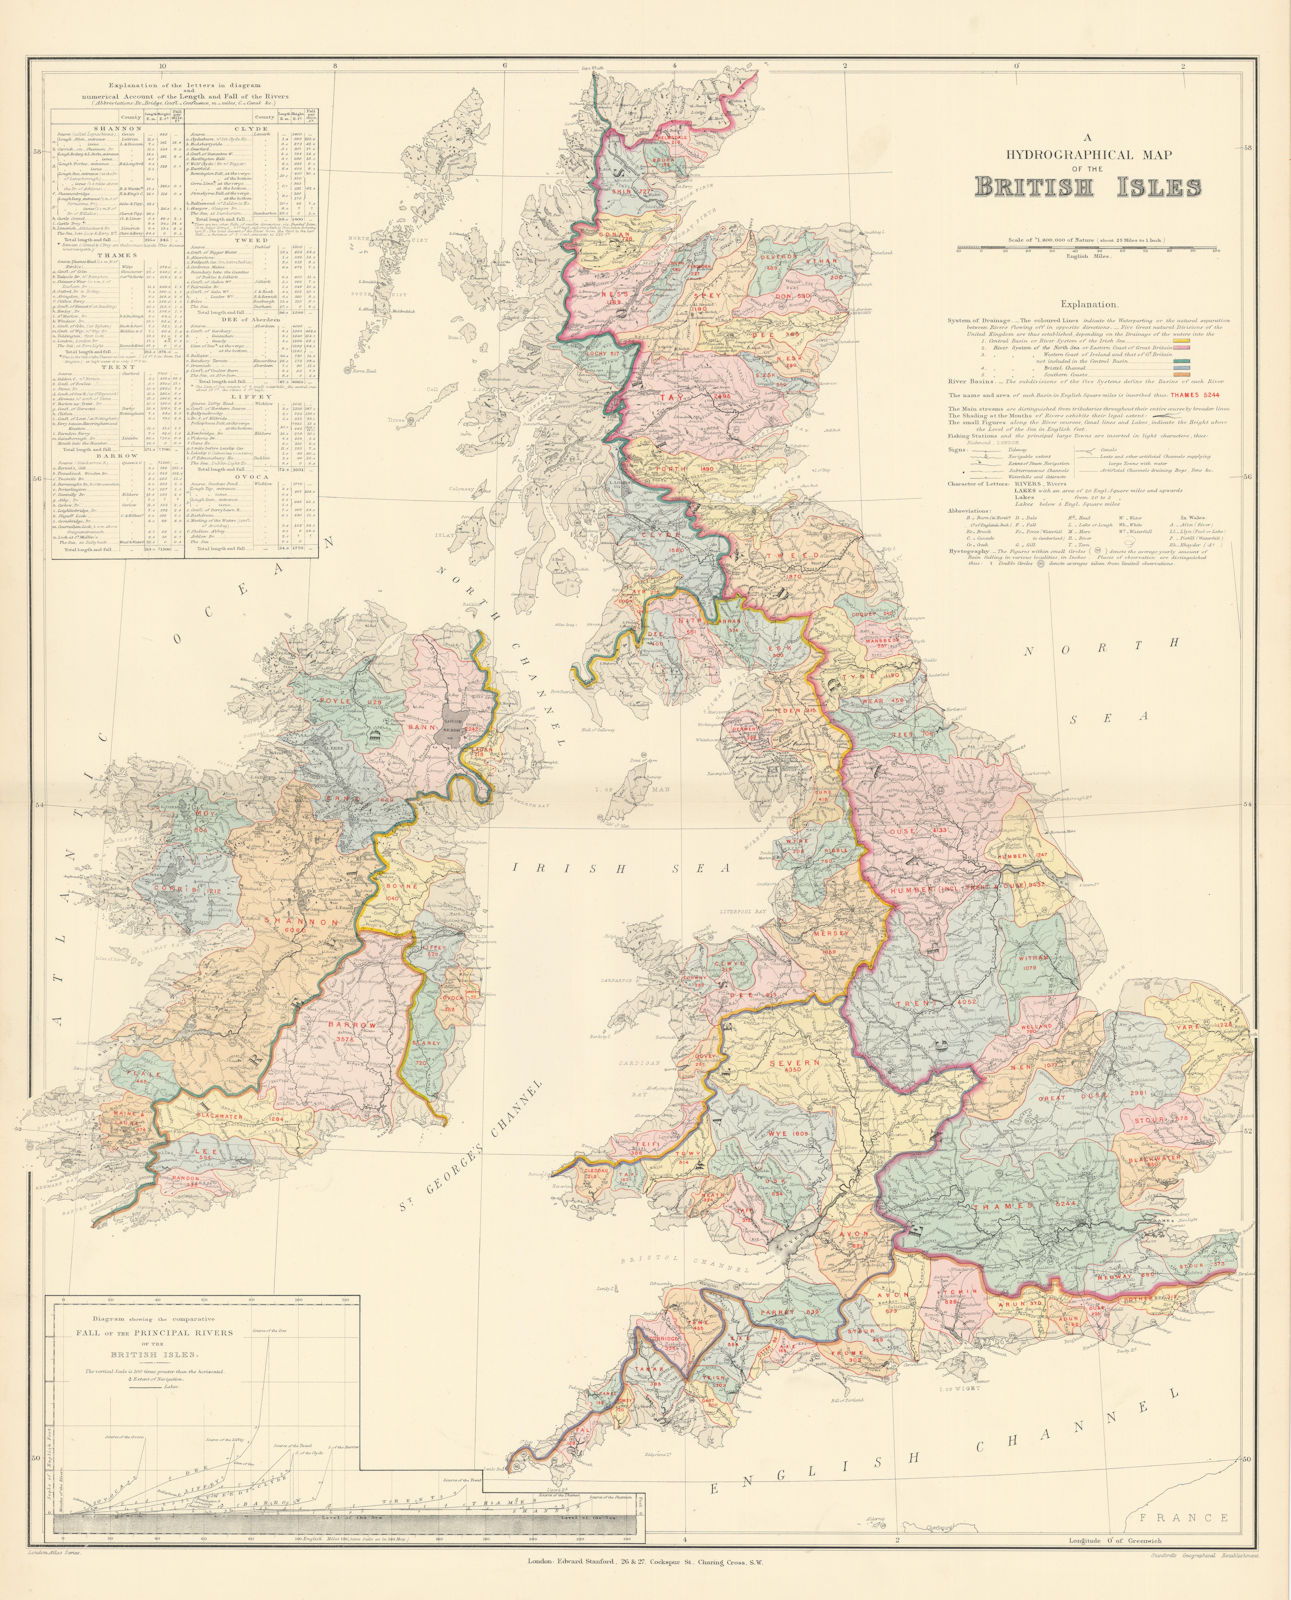 British Isles hydrographical. Watersheds River drainage basins STANFORD 1896 map